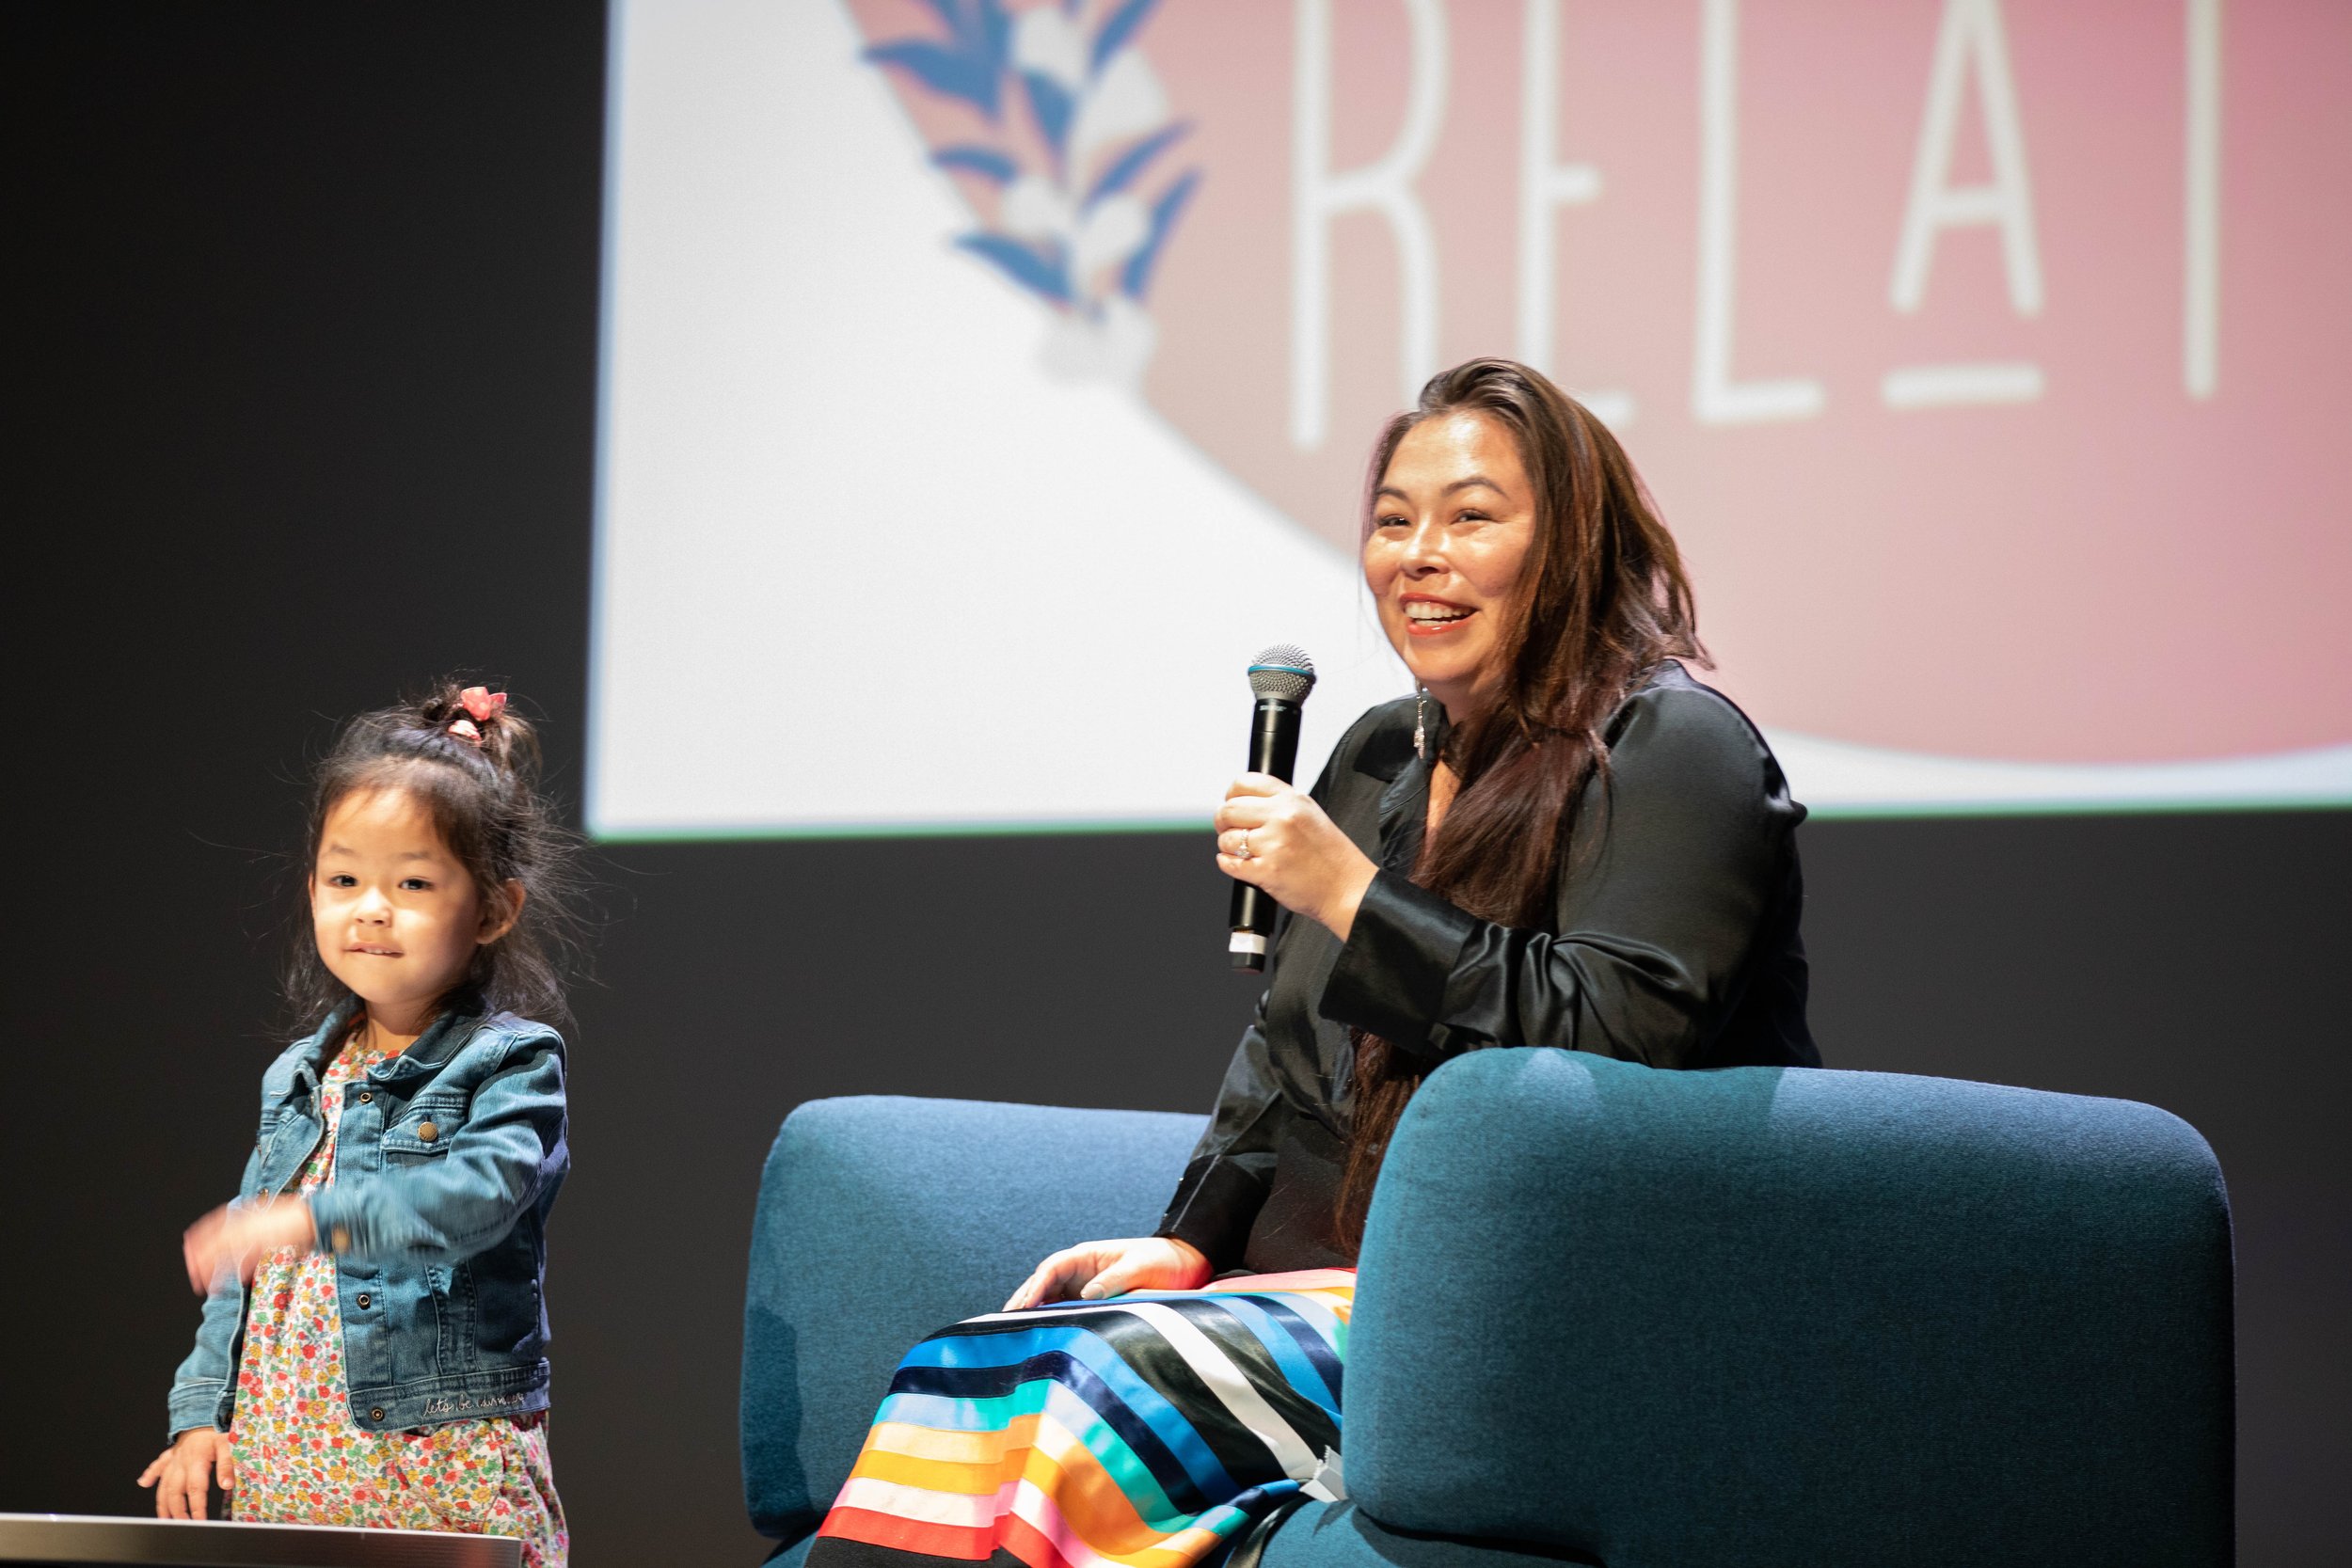  Matika Wilbur speaking and managing the Q&A after her short Documentary “One Small Thing”. Being from the Swinomish and Tulalip tribes, Wilbur is one of the nations’s leading photographers with sole goal to change the way we see Native America. A hi